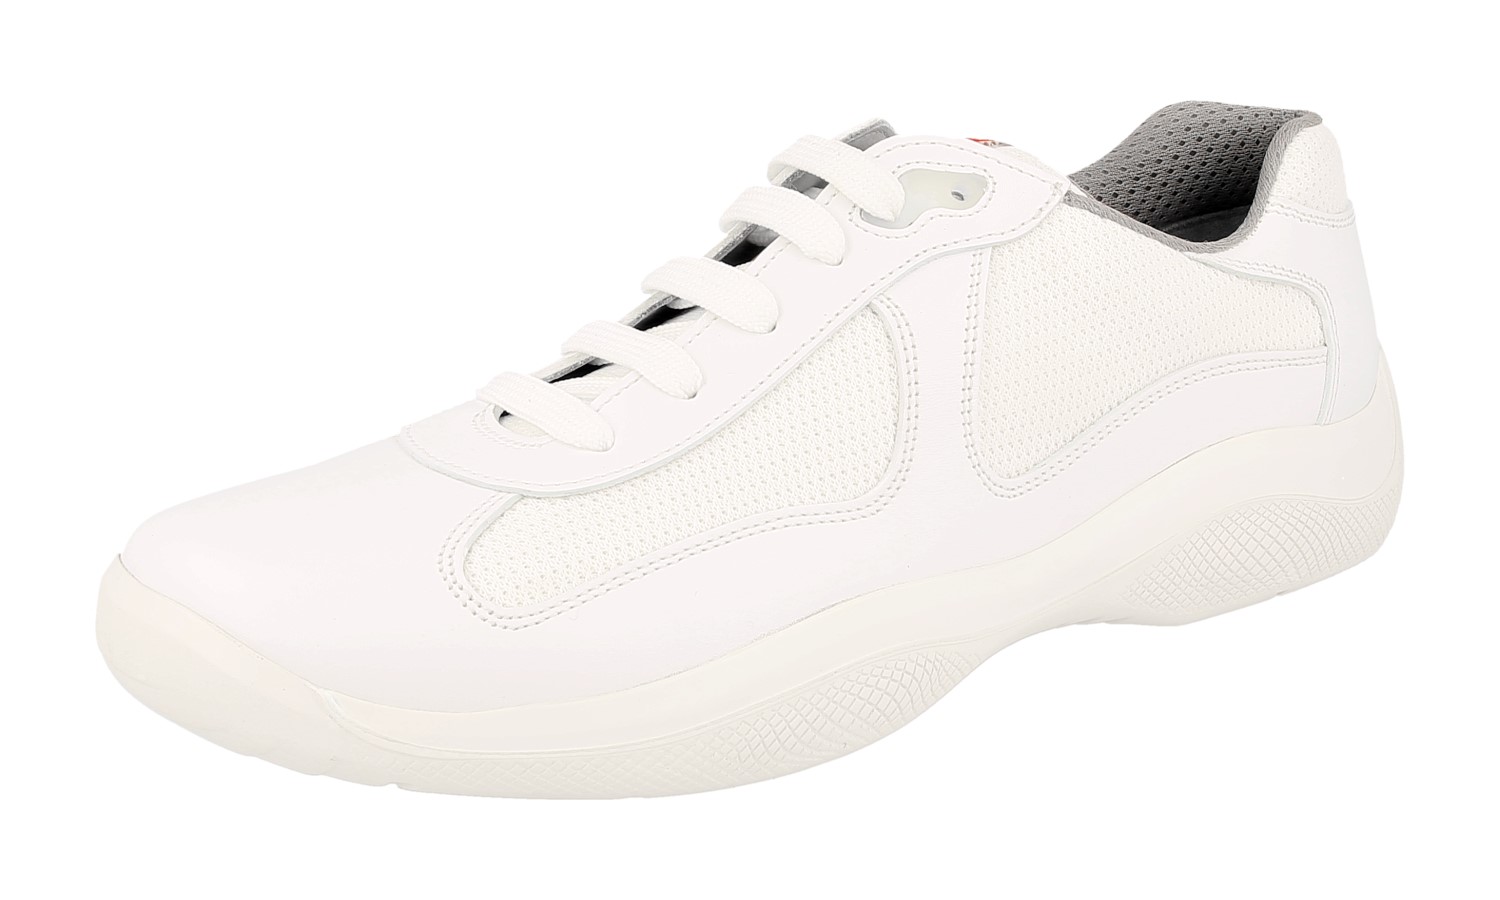 LUXURY PRADA AMERICAS CUP SNEAKERS SHOES PS0906 WHITE NEW US 10 EU 43